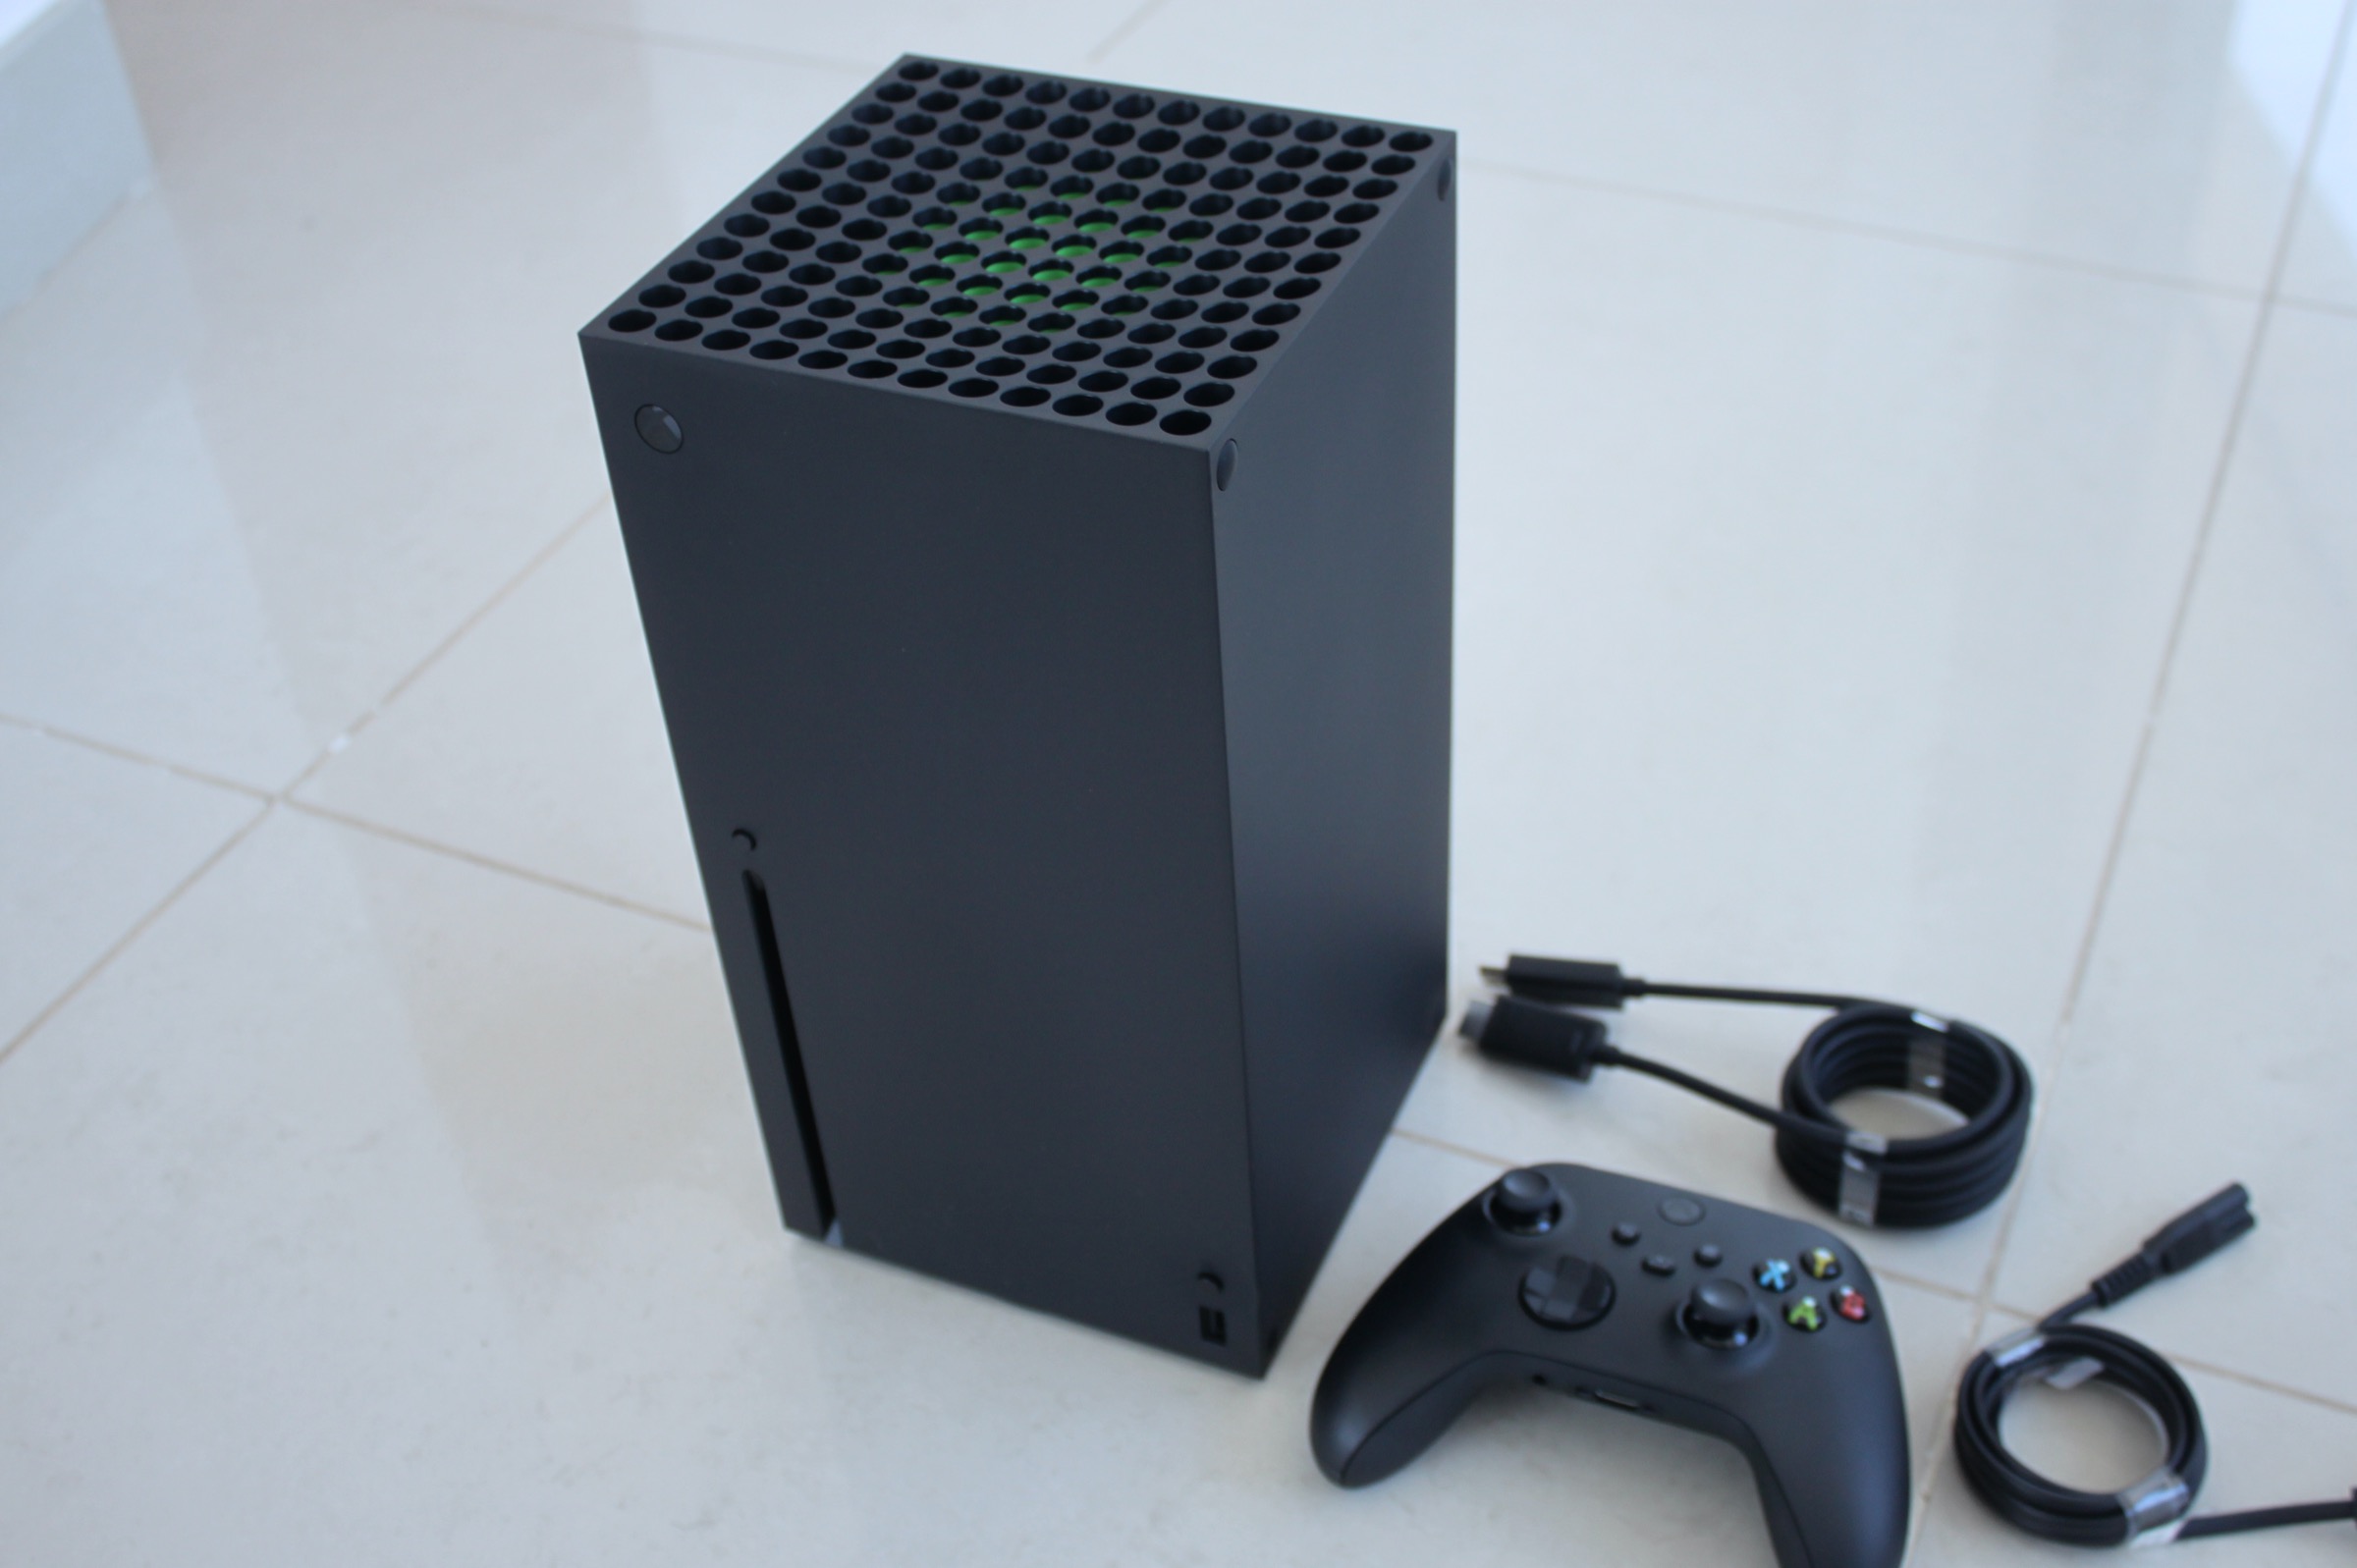 Xbox Series X: just how big is it - and how does it compare to Xbox One X?